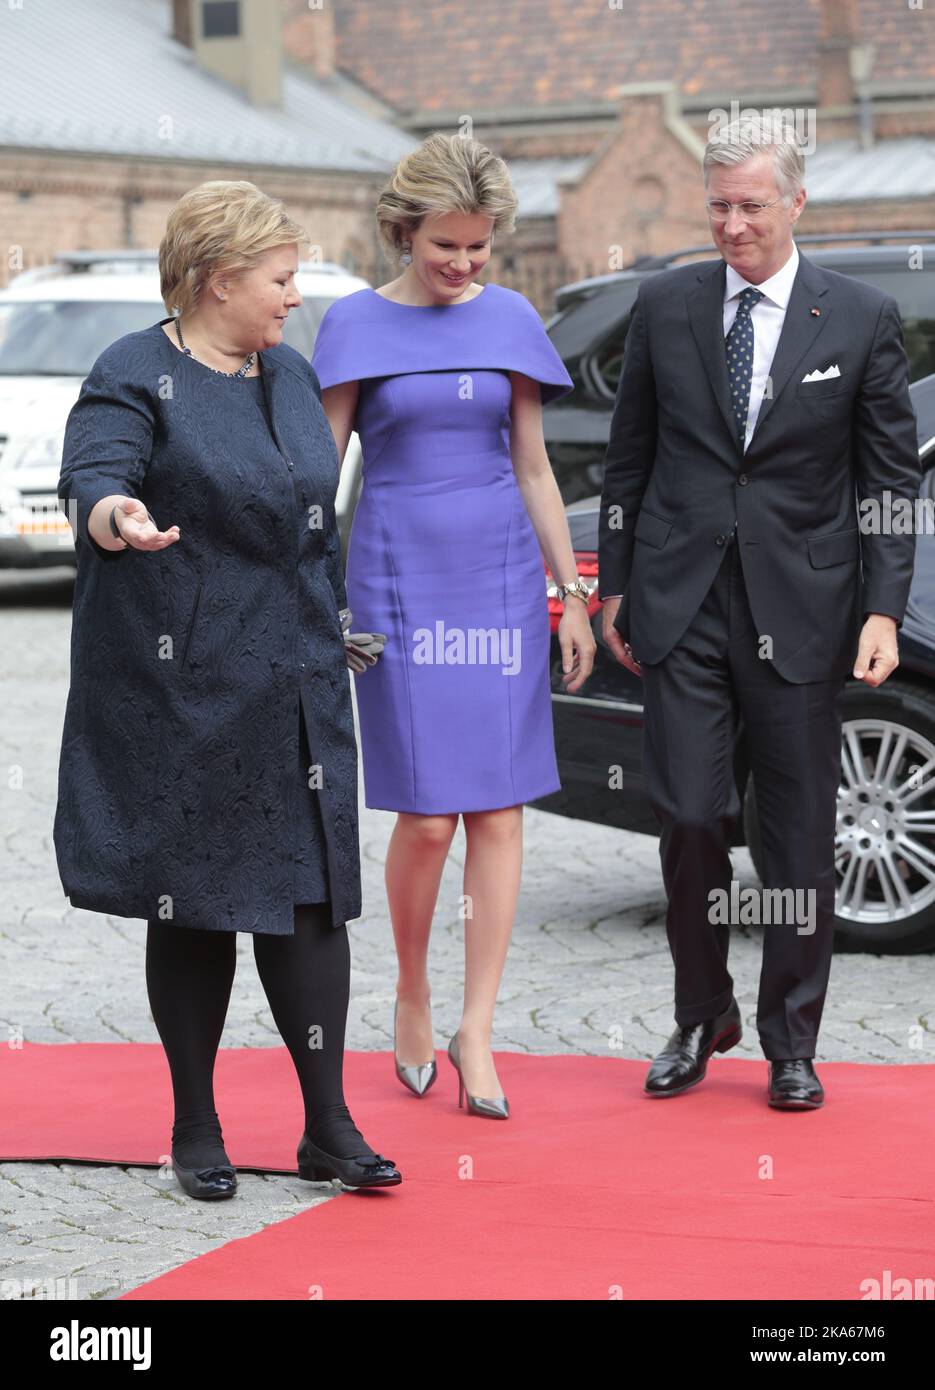 The Belgian Royal couple, King Philippe and Queen Mathilde were received by the Norwegian Prime Minister Erna Solberg at her office in Oslo during their official visit to Norway Wednesday April 30, 2014.  Stock Photo